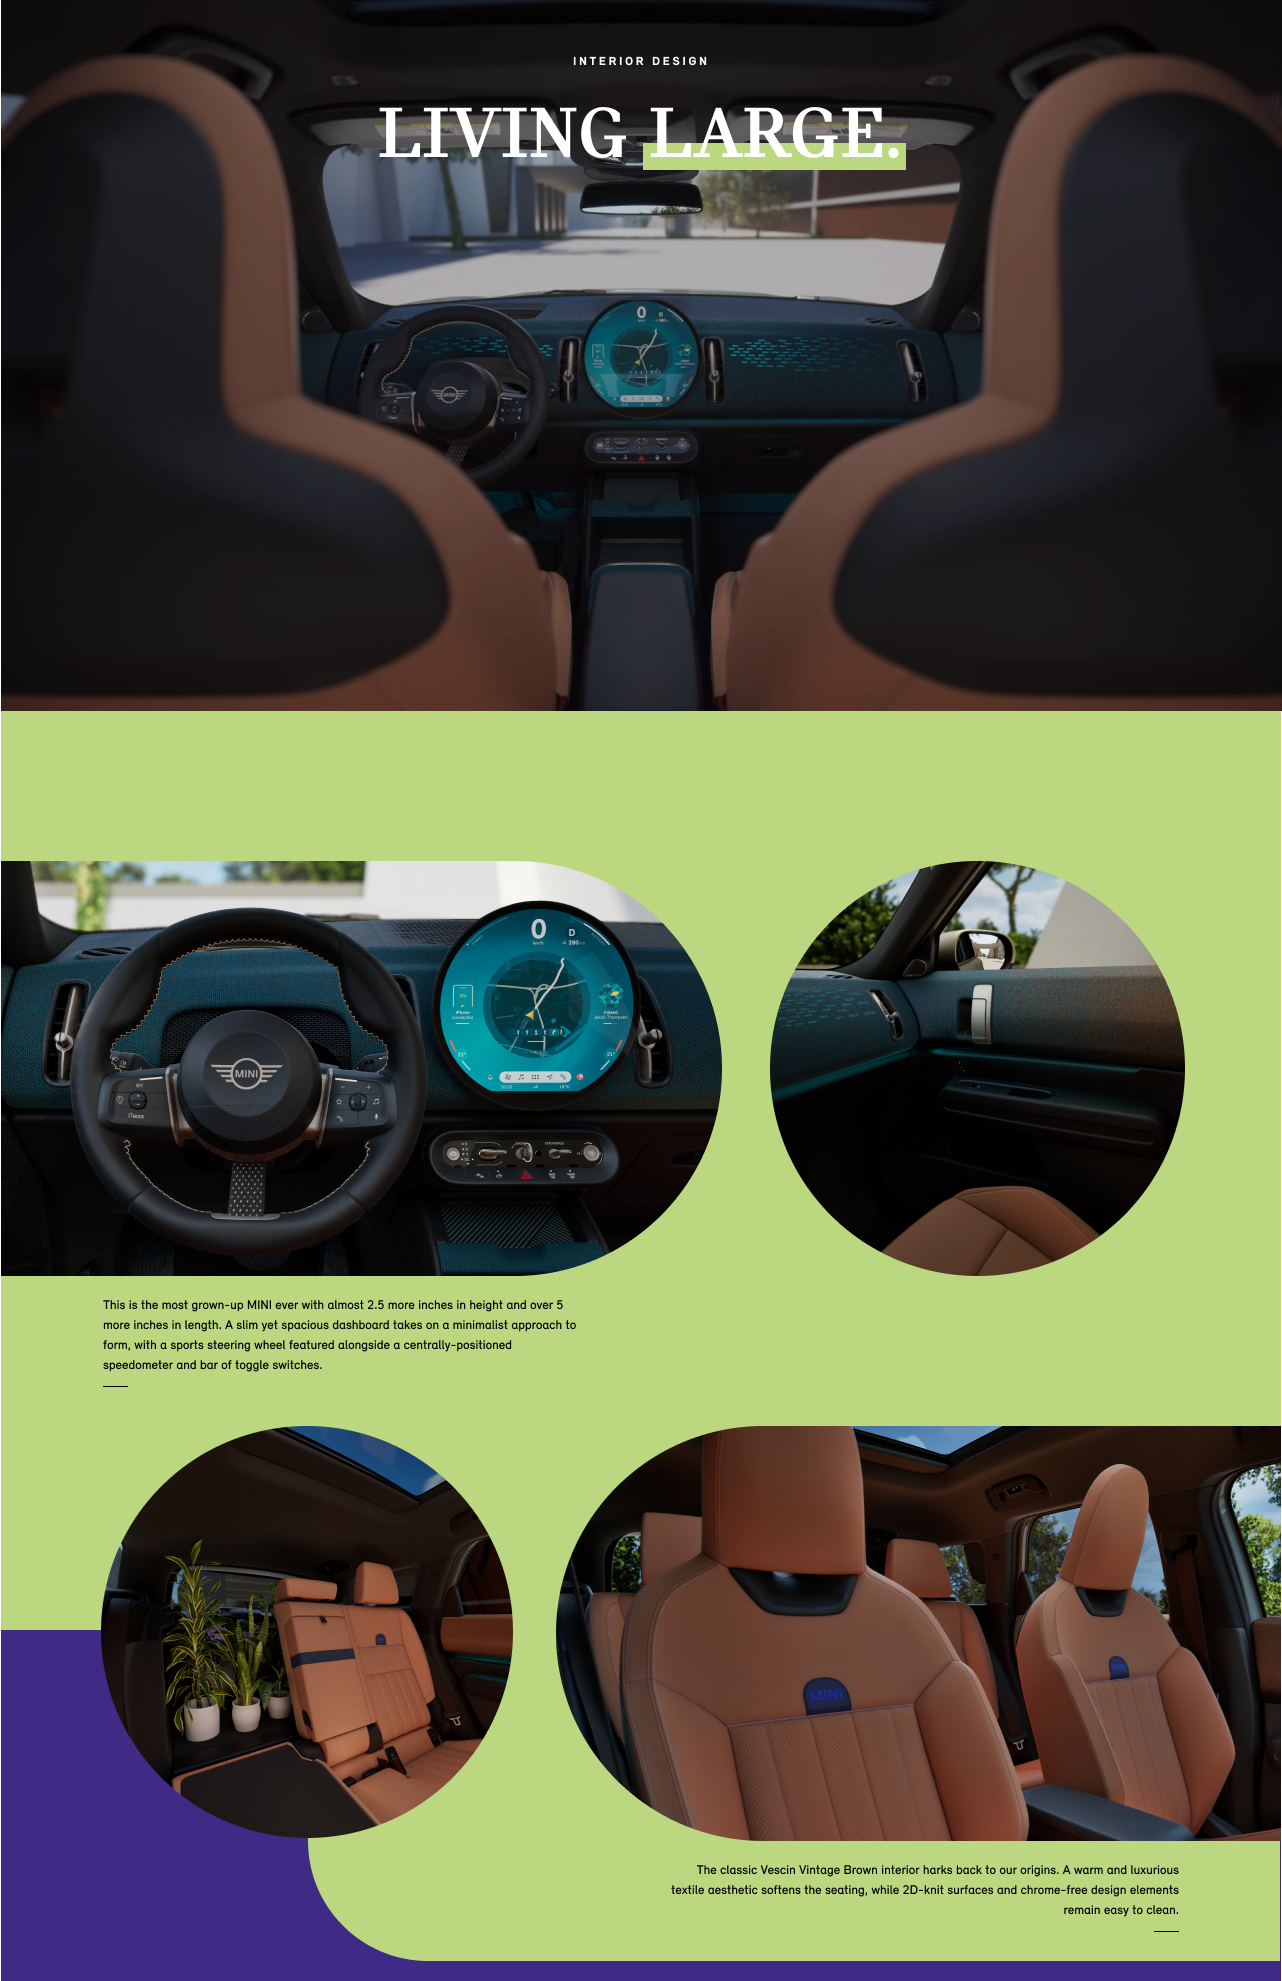 View of the front row and dashboard of a MINI Countryman S ALL4 from the perspective of the back row. Also featuring close-up views of front-passenger door, the Vescin Vintage Brown interior, and a view of the dashboard.